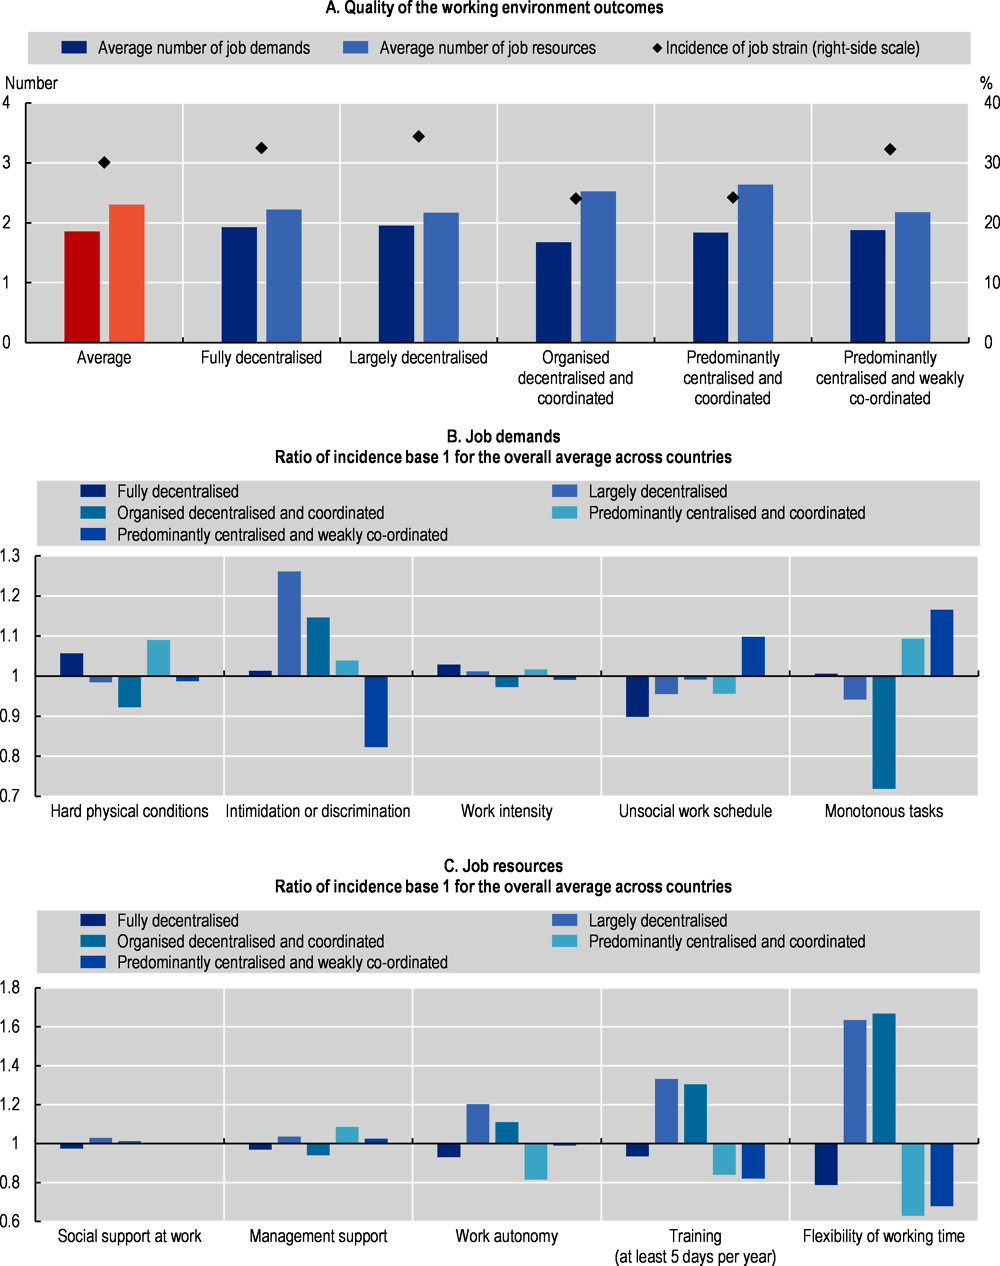 Figure 4.3. Job demands and job resources by collective bargaining systems in Europe